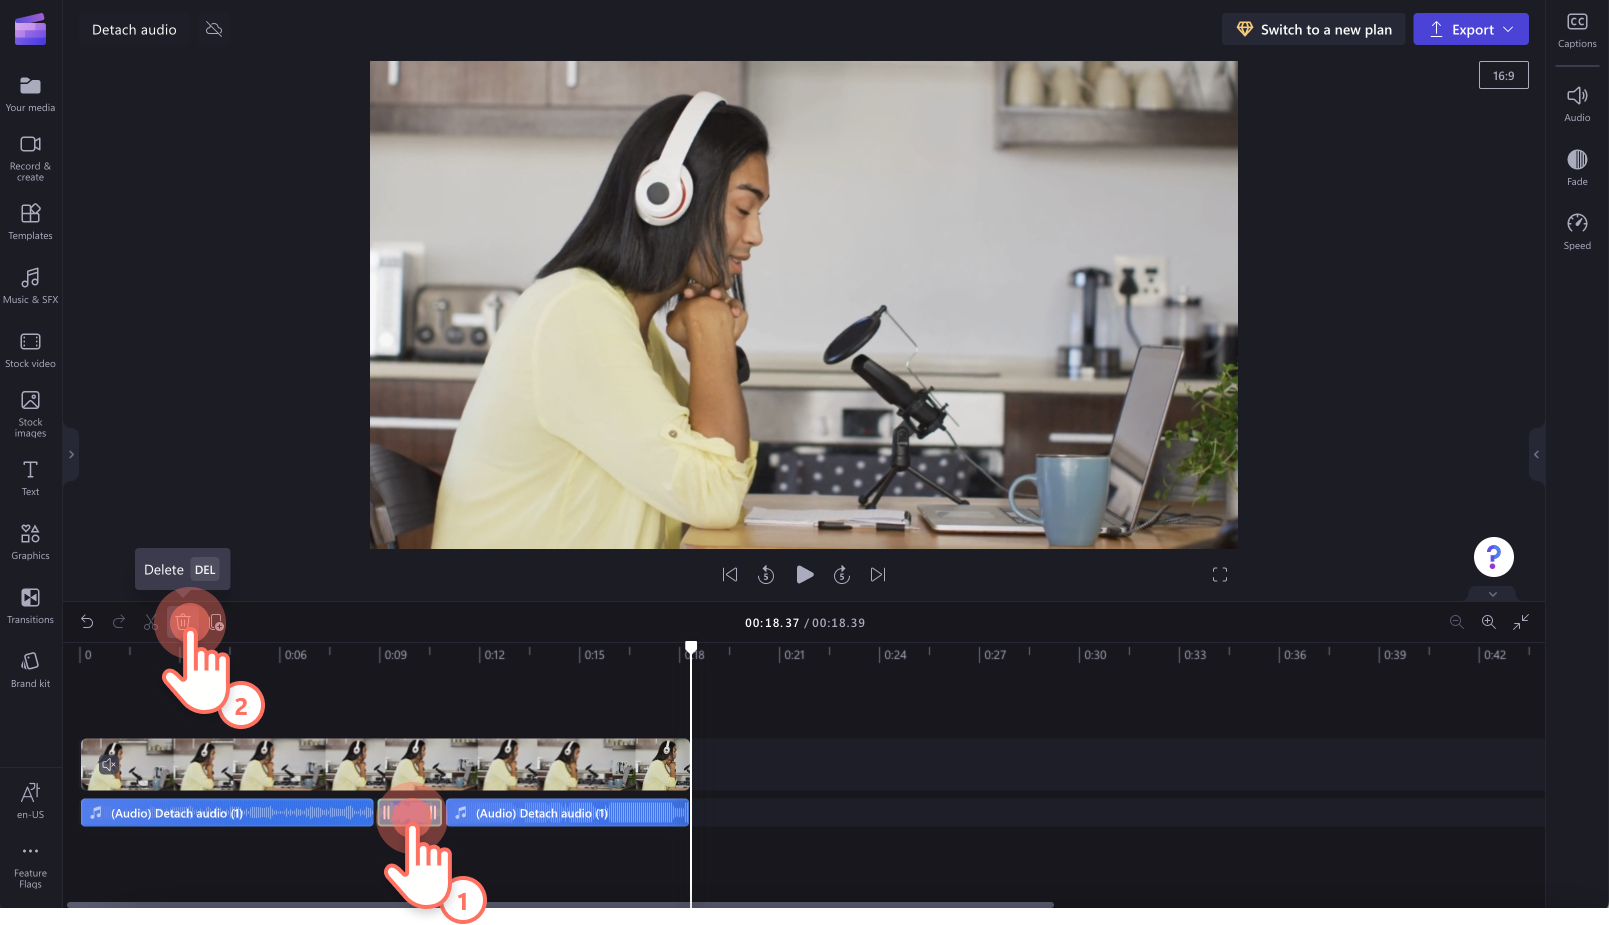 An image of the unwanted audio clip being deleted using the delete button.